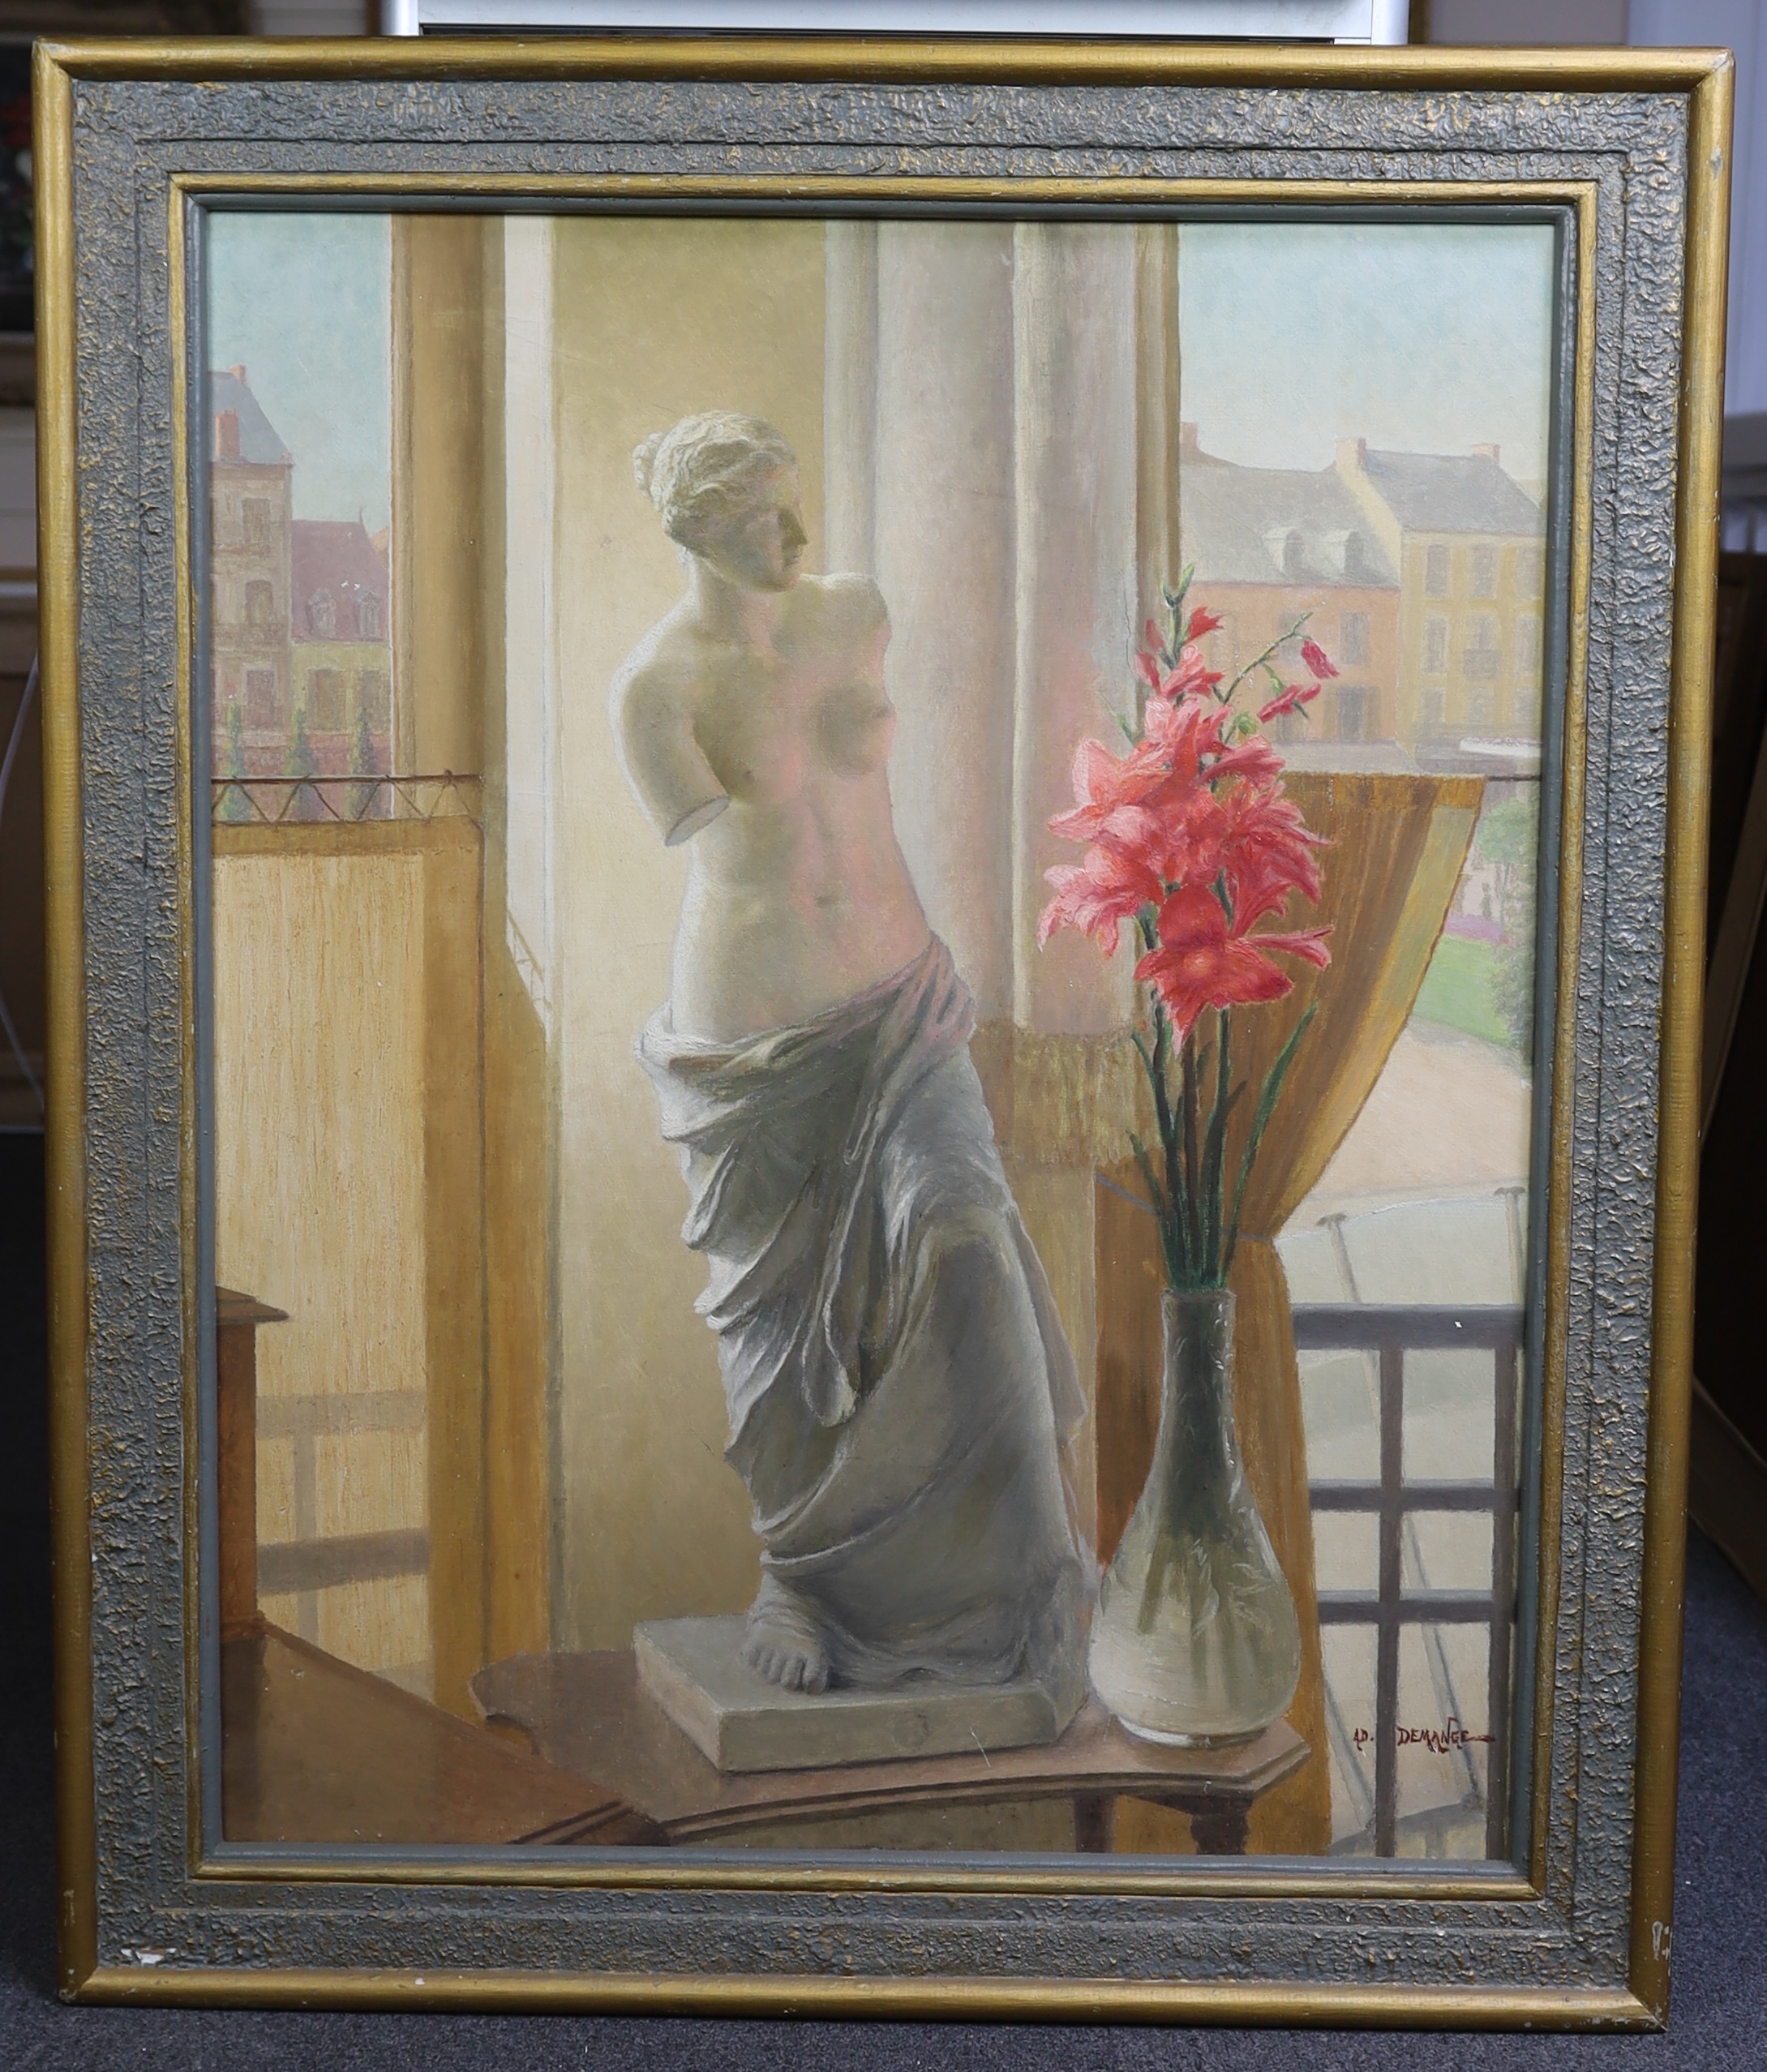 Adolphe Demange (French, 1857-1928), oil on canvas, 'Venus de Milo sculpture and gladioli in the window', signed, 97 x 77cm